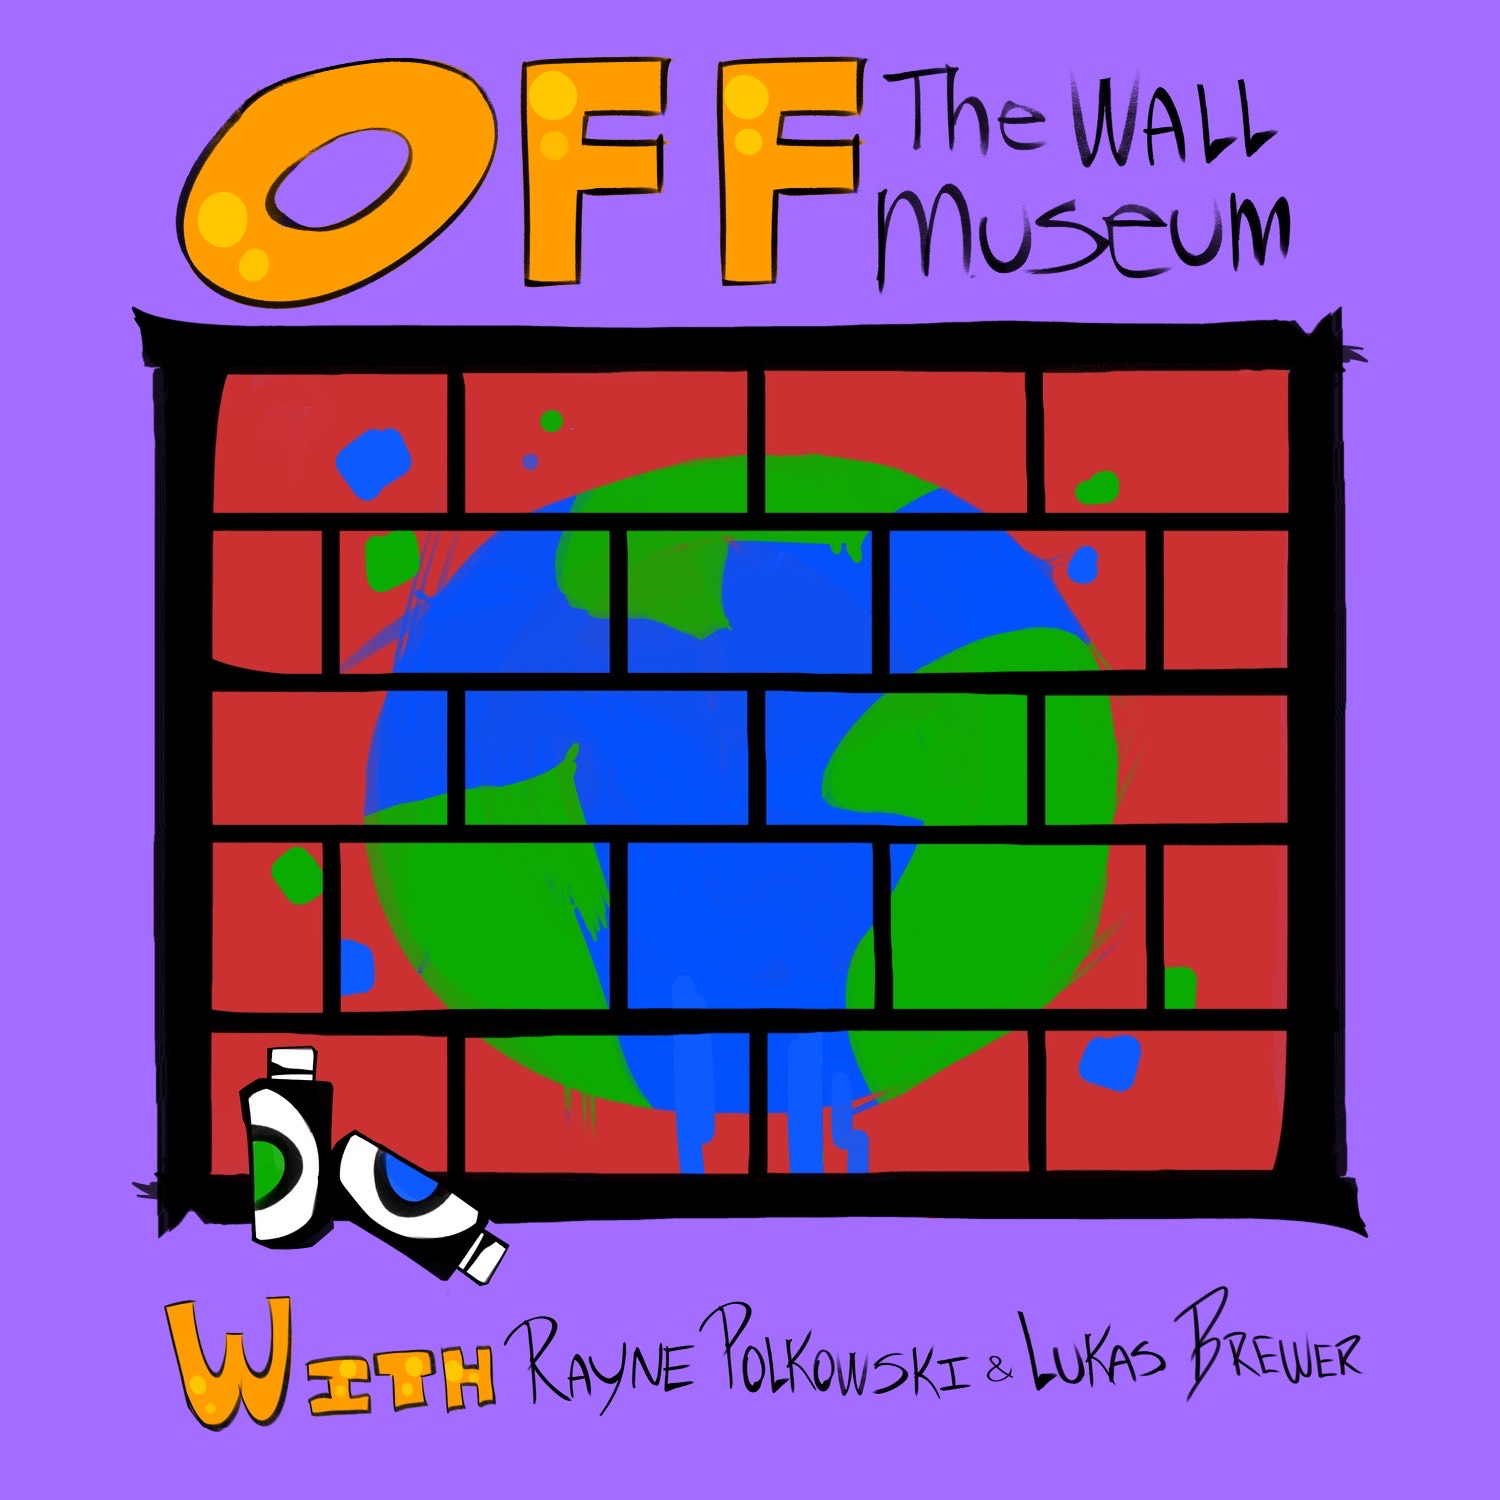 Off the Wall Museum 